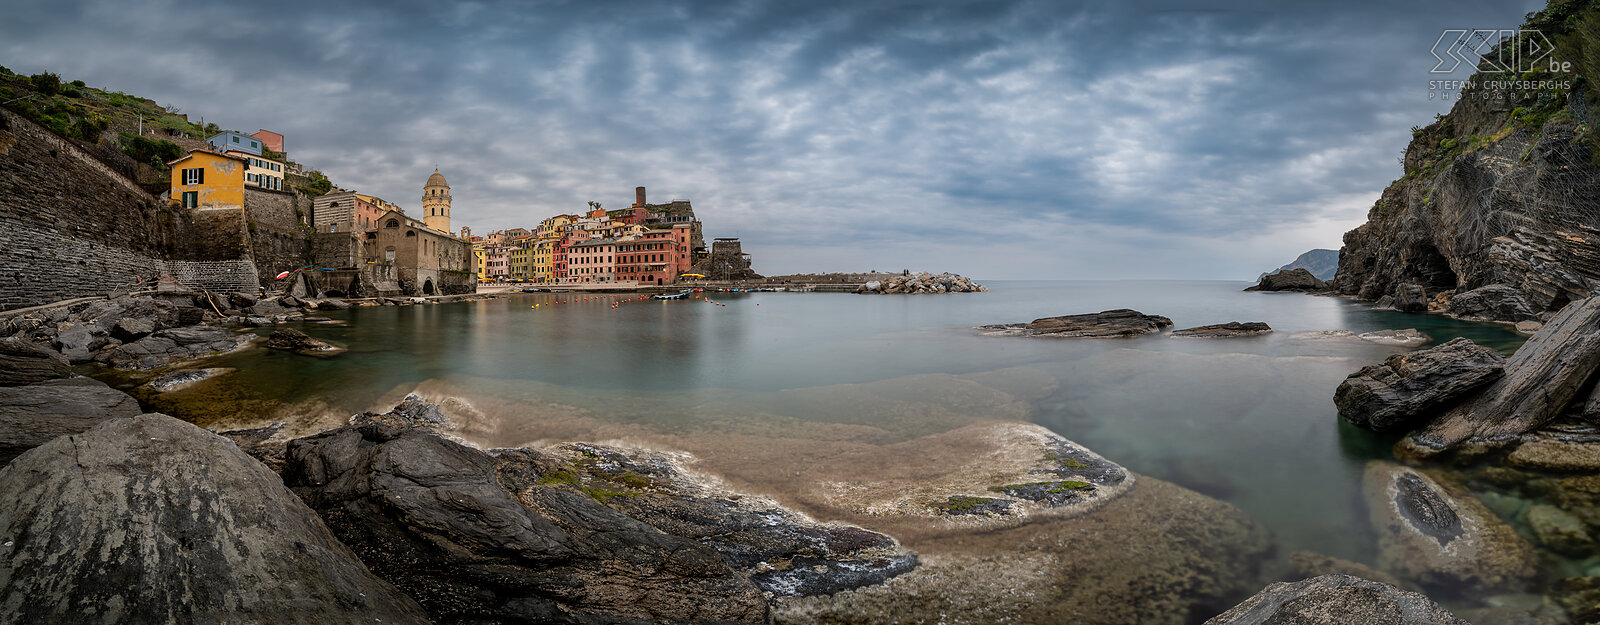 Vernazza Panorama image of the bay of Vernazza Stefan Cruysberghs